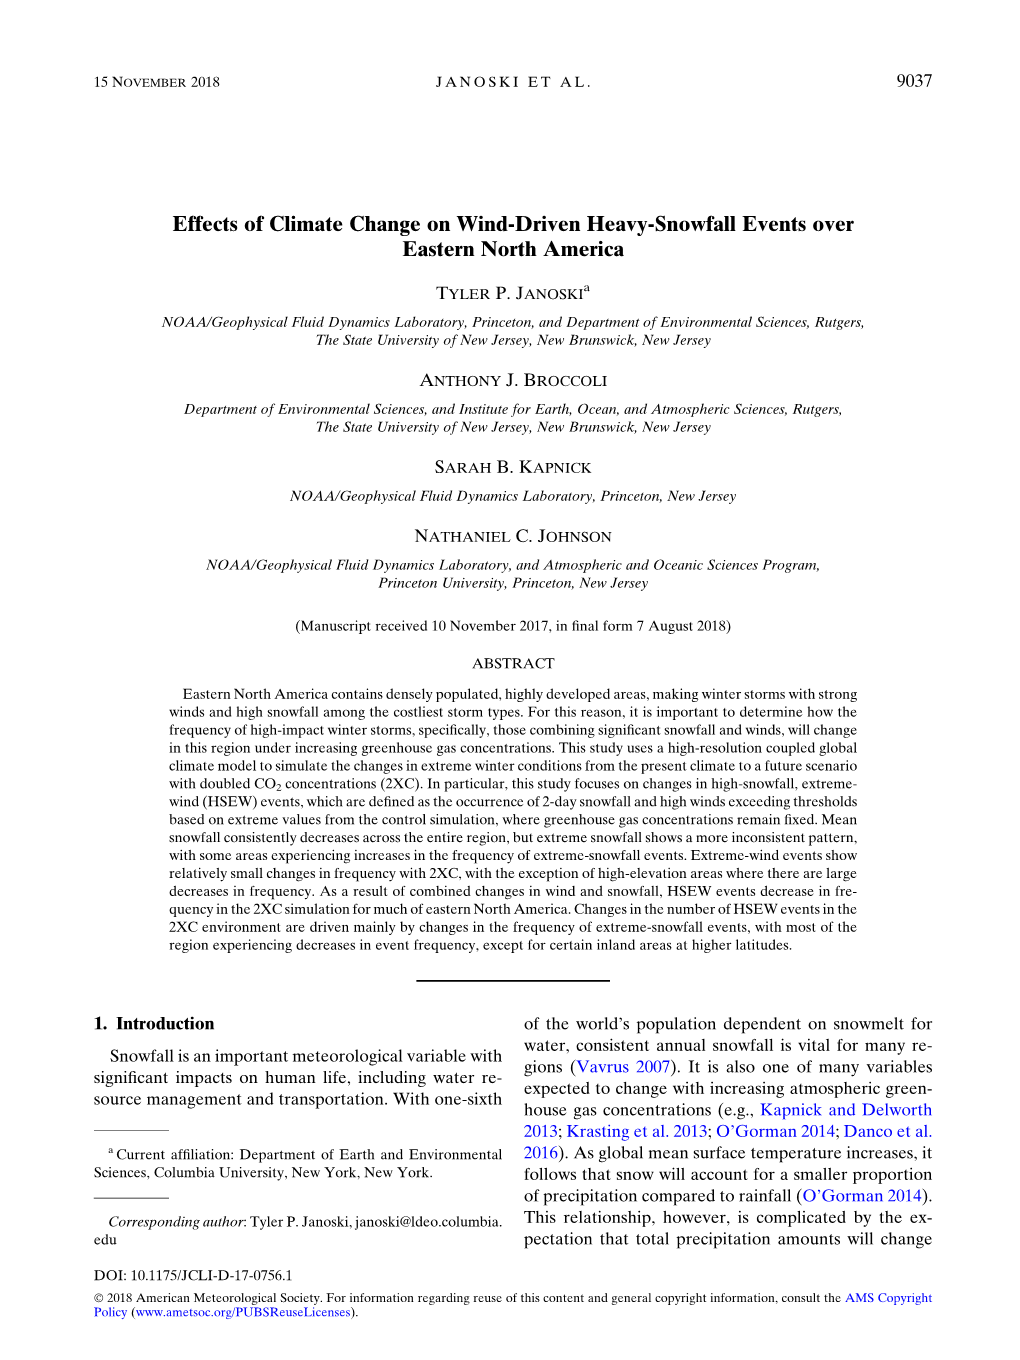 Effects of Climate Change on Wind-Driven Heavy-Snowfall Events Over Eastern North America